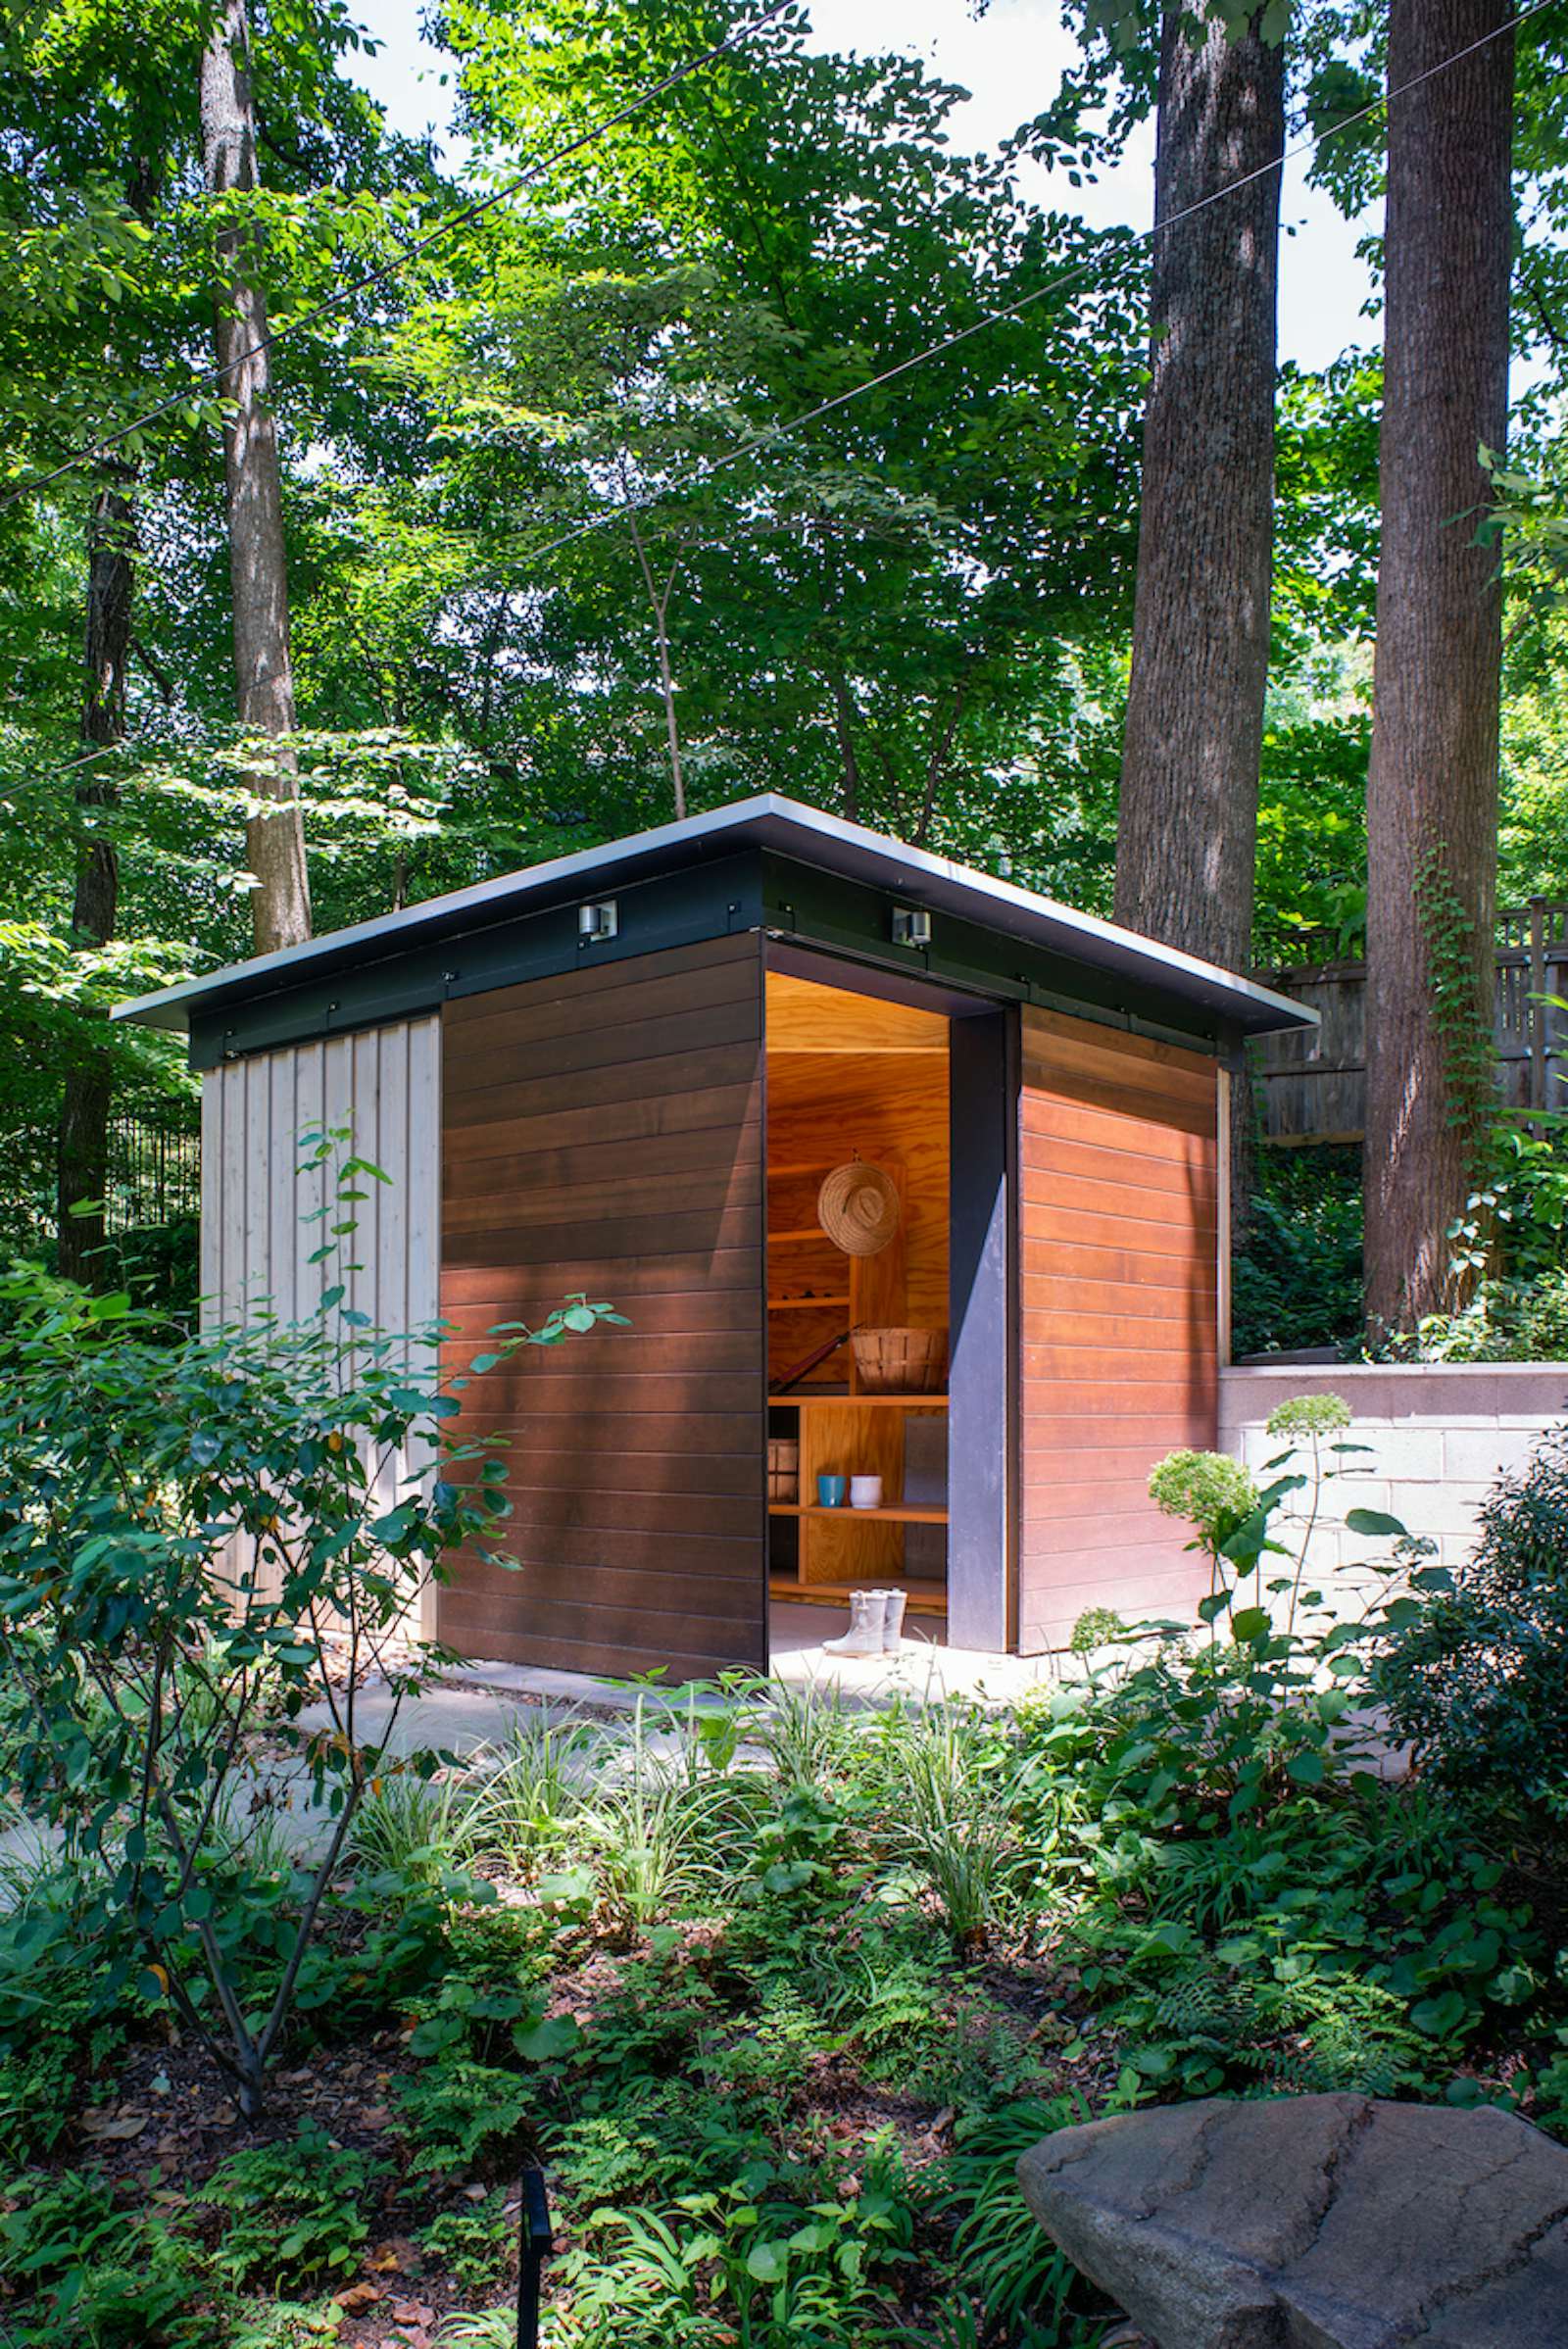 photo-22-of-28-in-27-modern-she-shed-designs-to-inspire-your-backyard